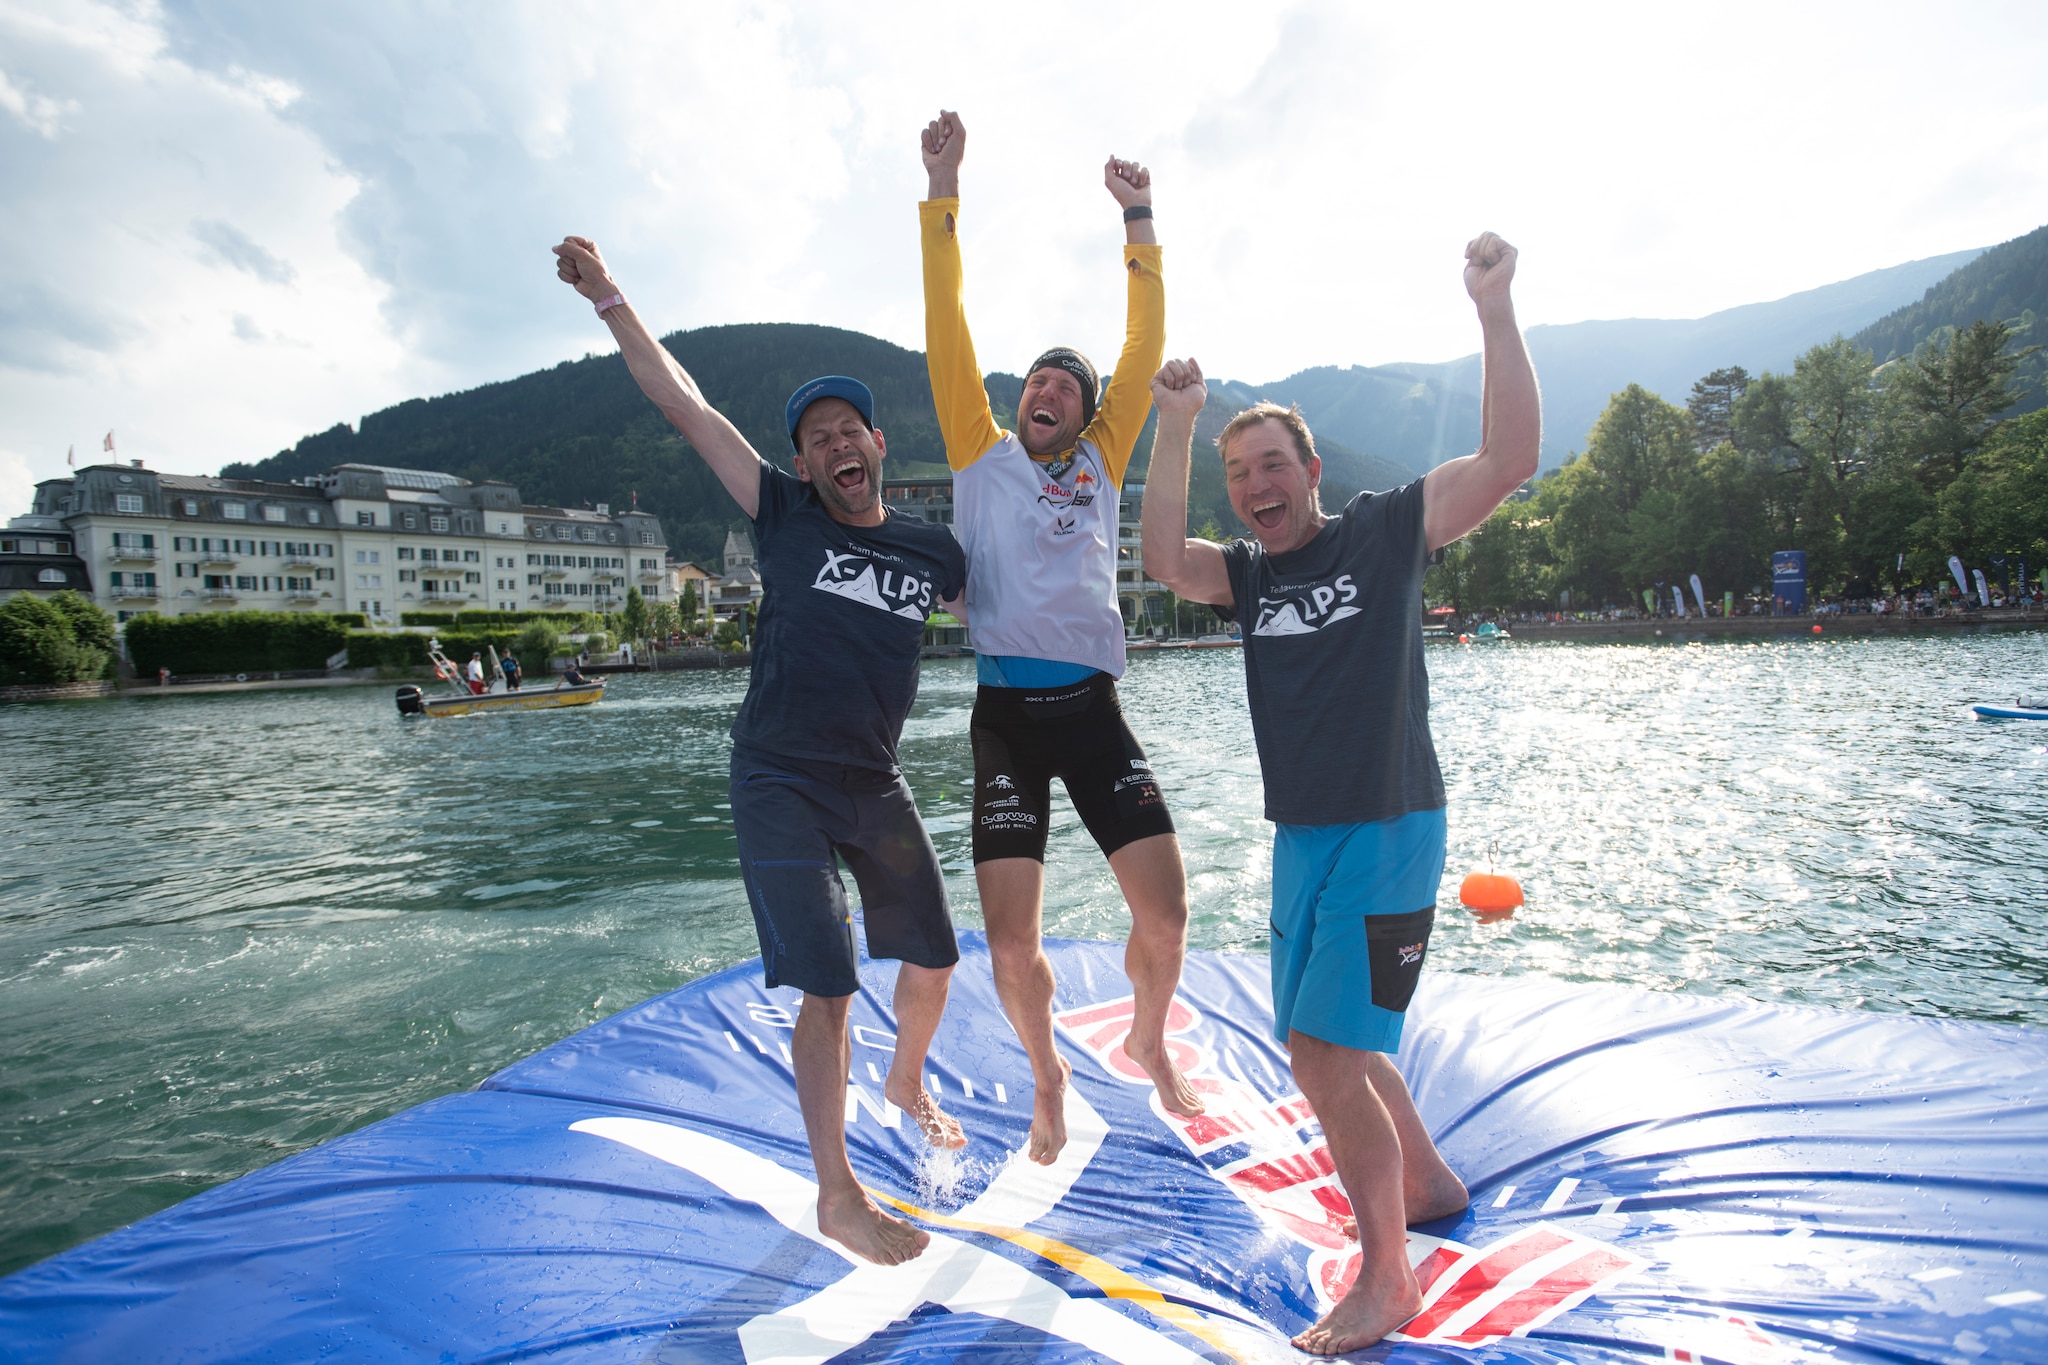 Christian Maurer (SUI1) celebrates in the Red Bull X-Alps finish in Zell am See, Austria on June 28, 2021.